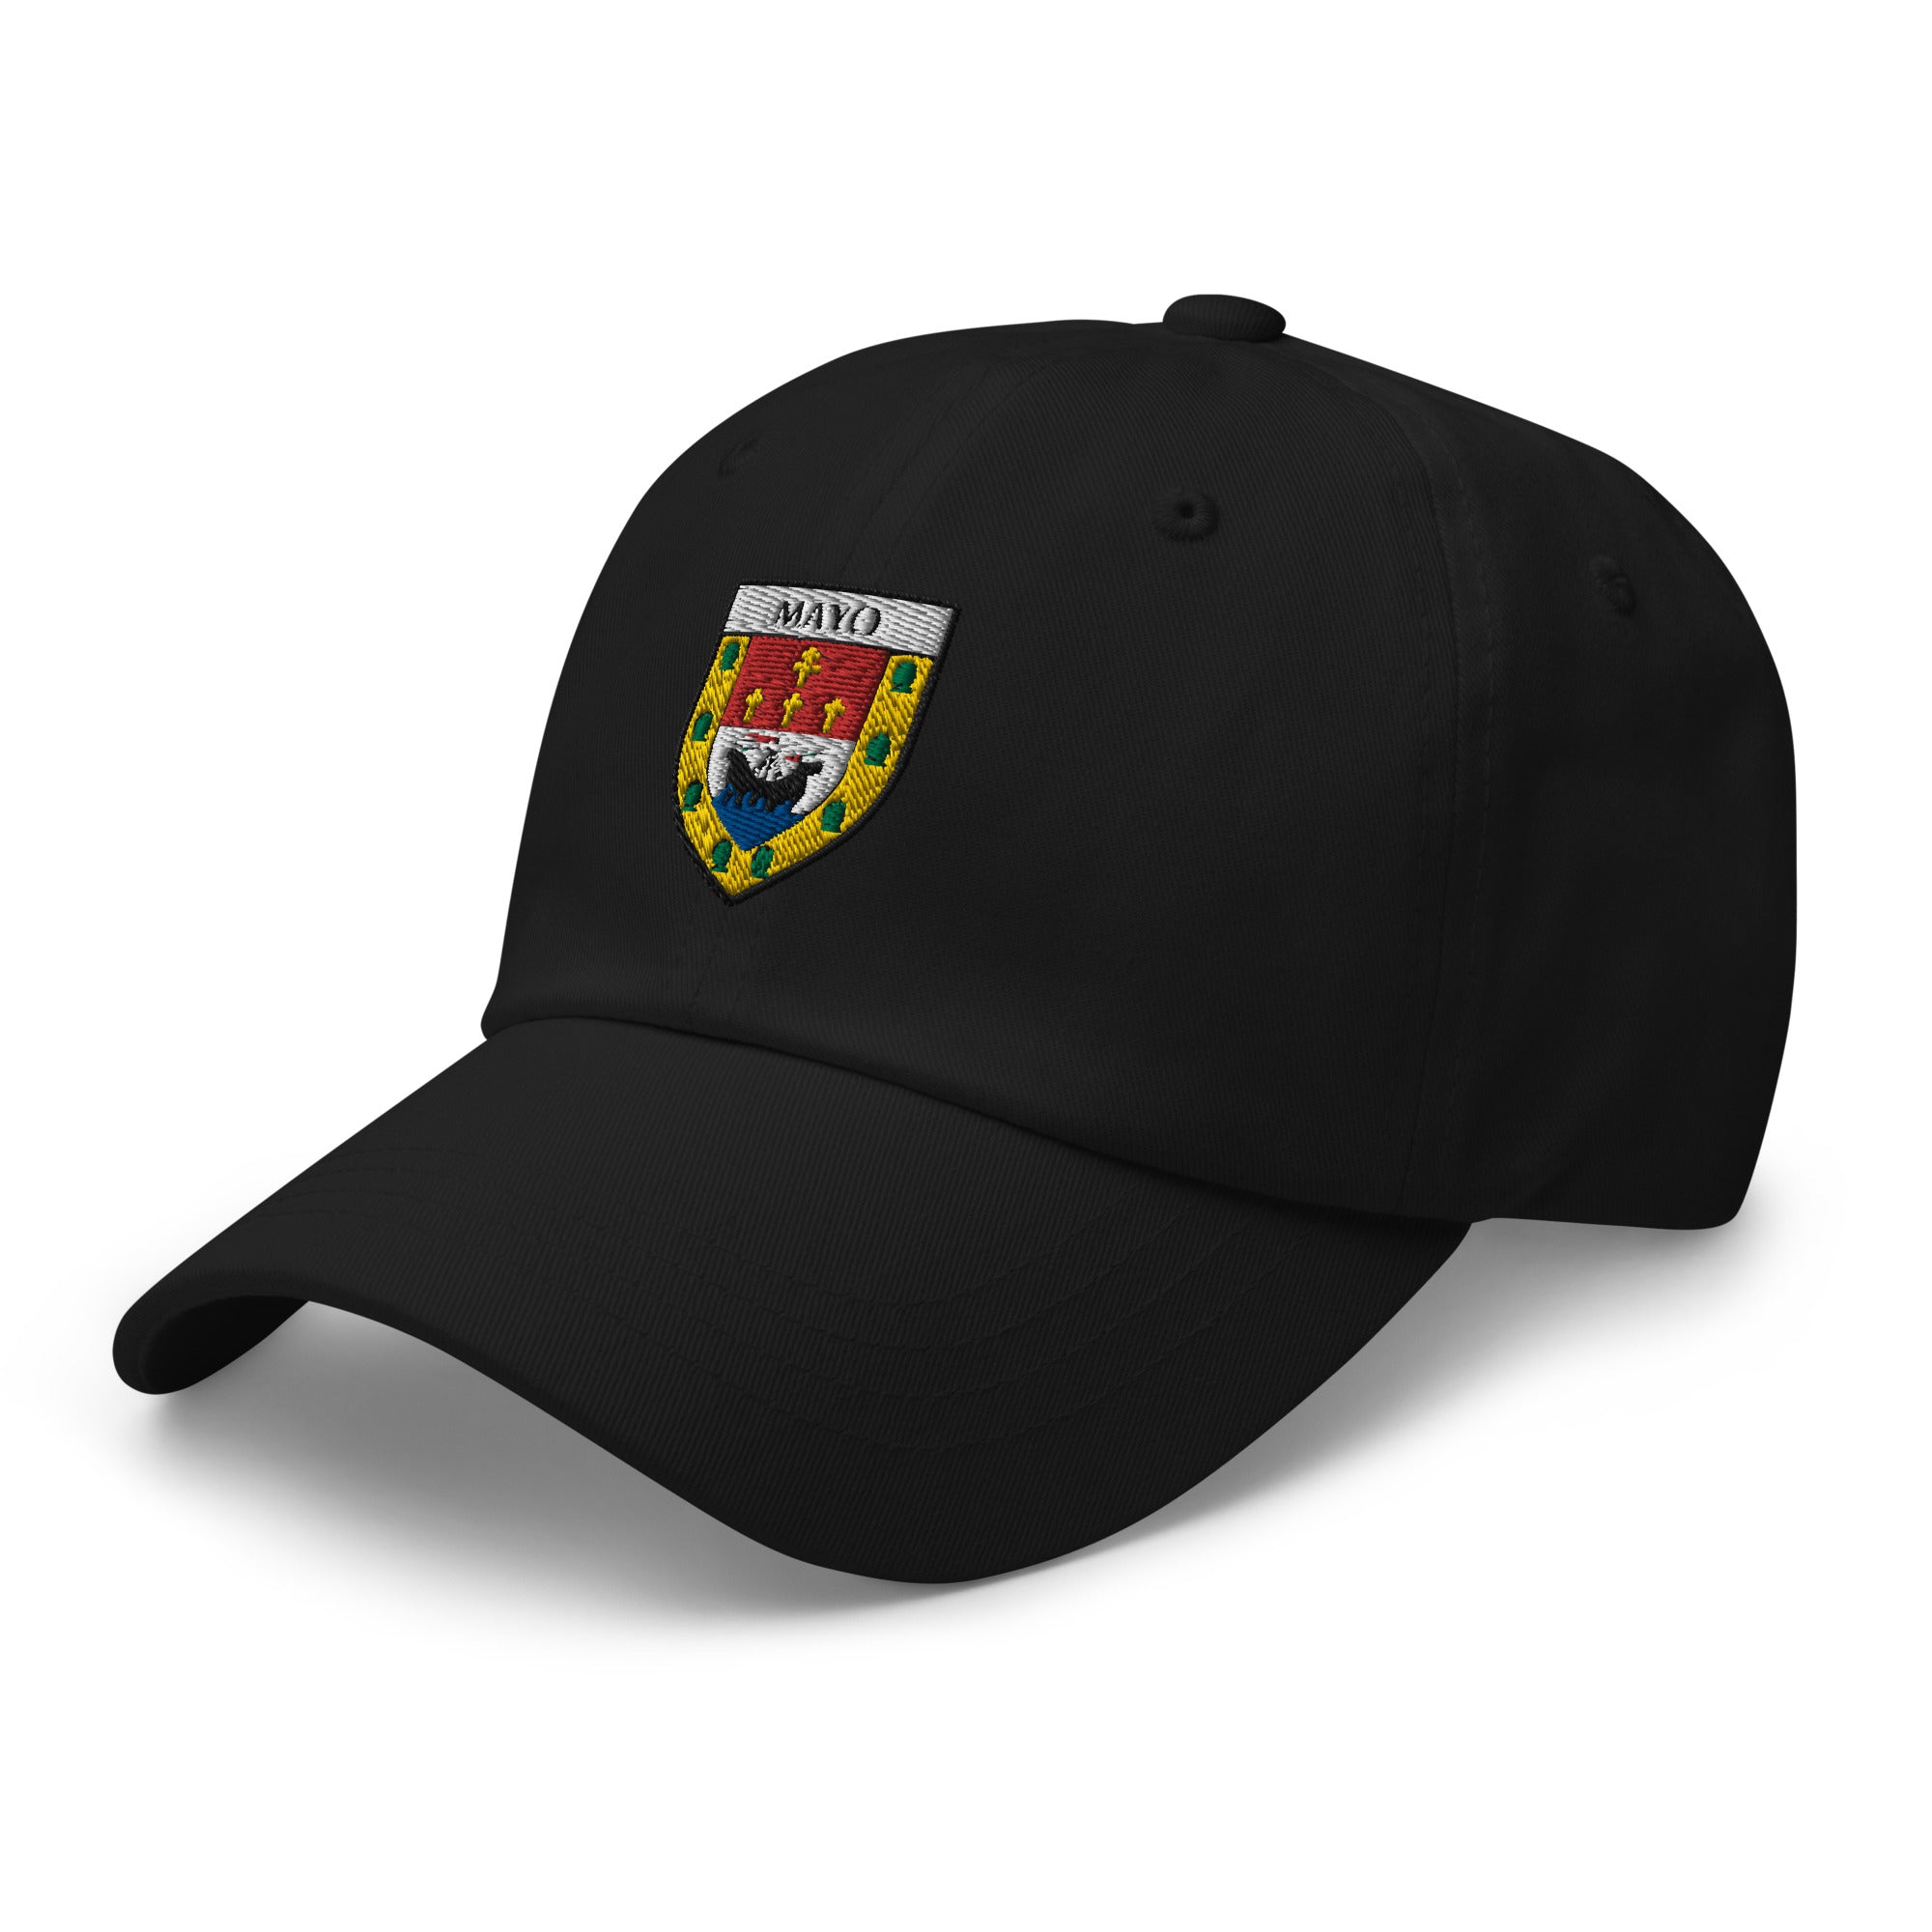 County Mayo Supporters Crest Baseball Cap Black County Wear